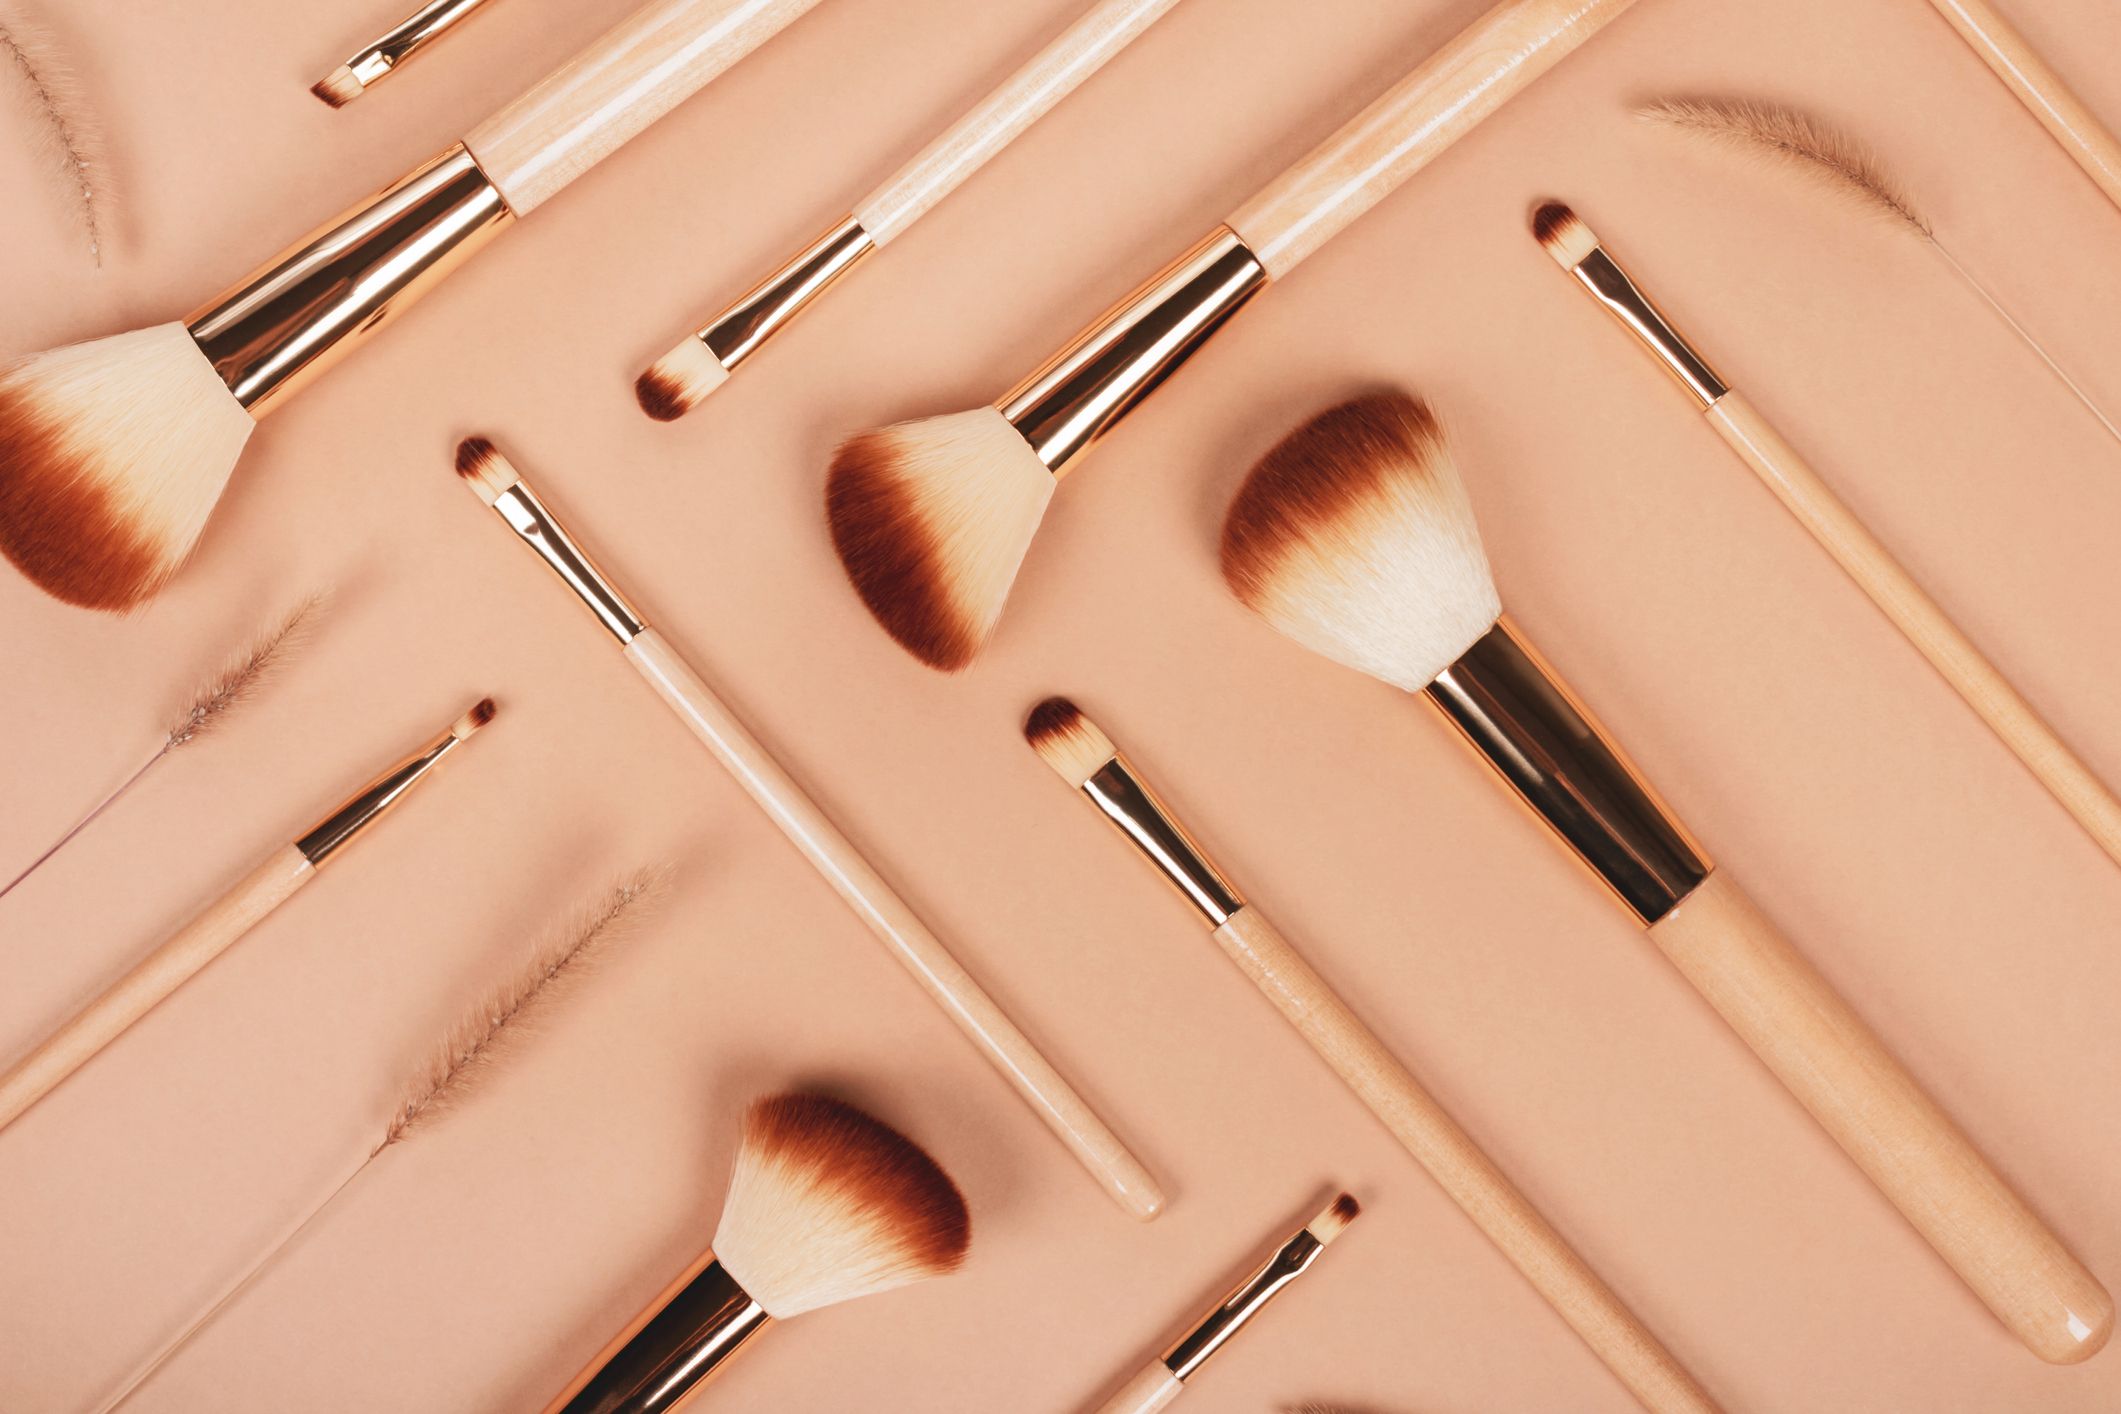 How To Clean Makeup Brushes Properly